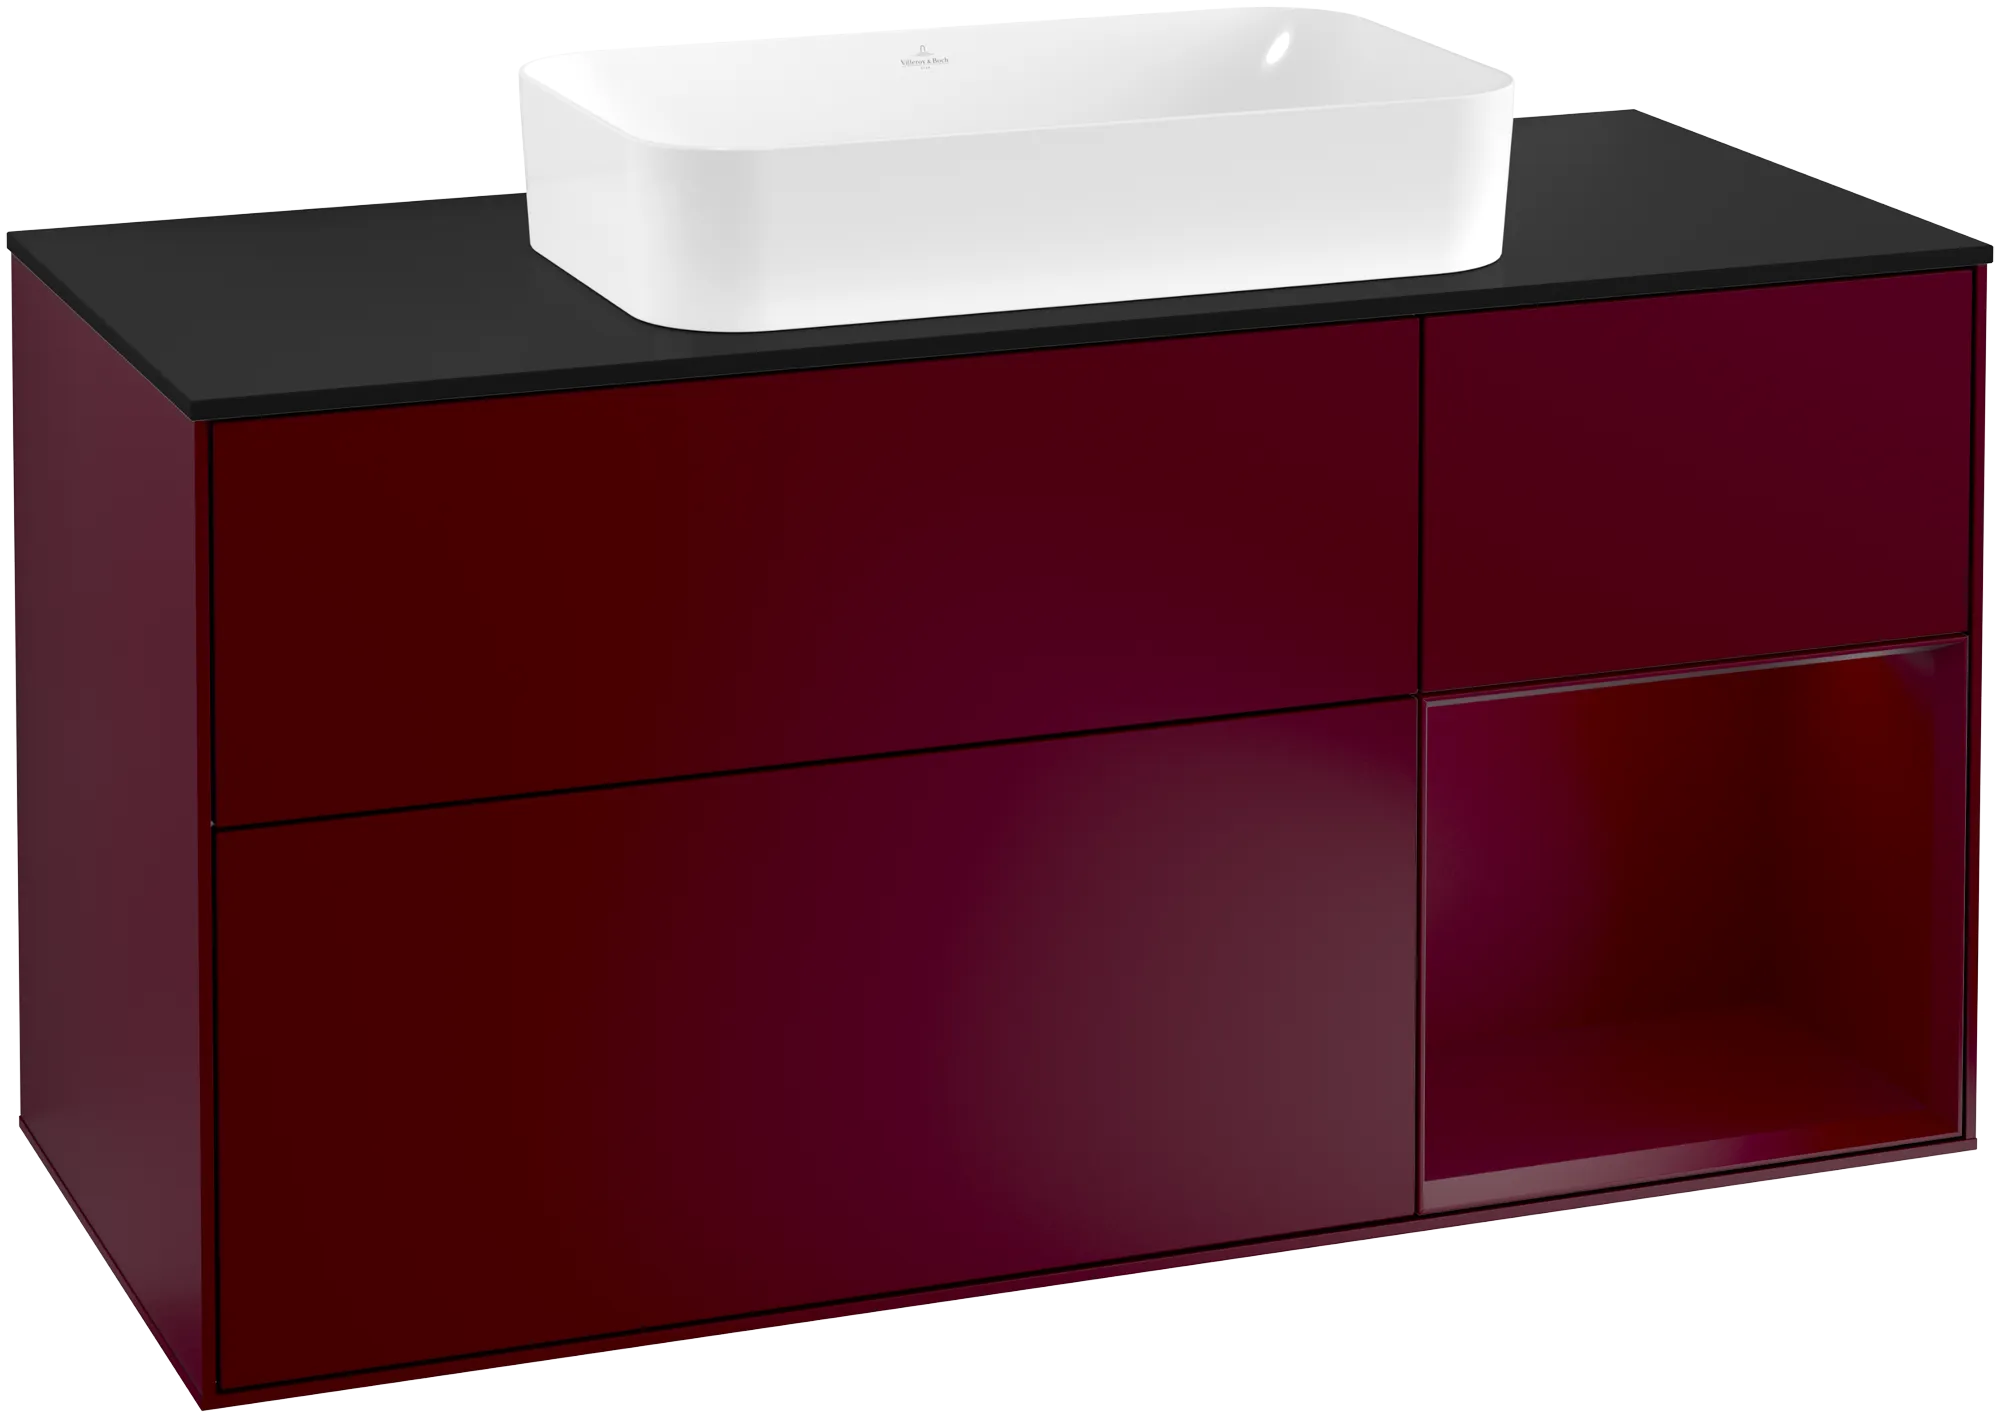 Obrázek VILLEROY BOCH Finion Vanity unit, with lighting, 3 pull-out compartments, 1200 x 603 x 501 mm, Peony Matt Lacquer / Peony Matt Lacquer / Glass Black Matt #G302HBHB